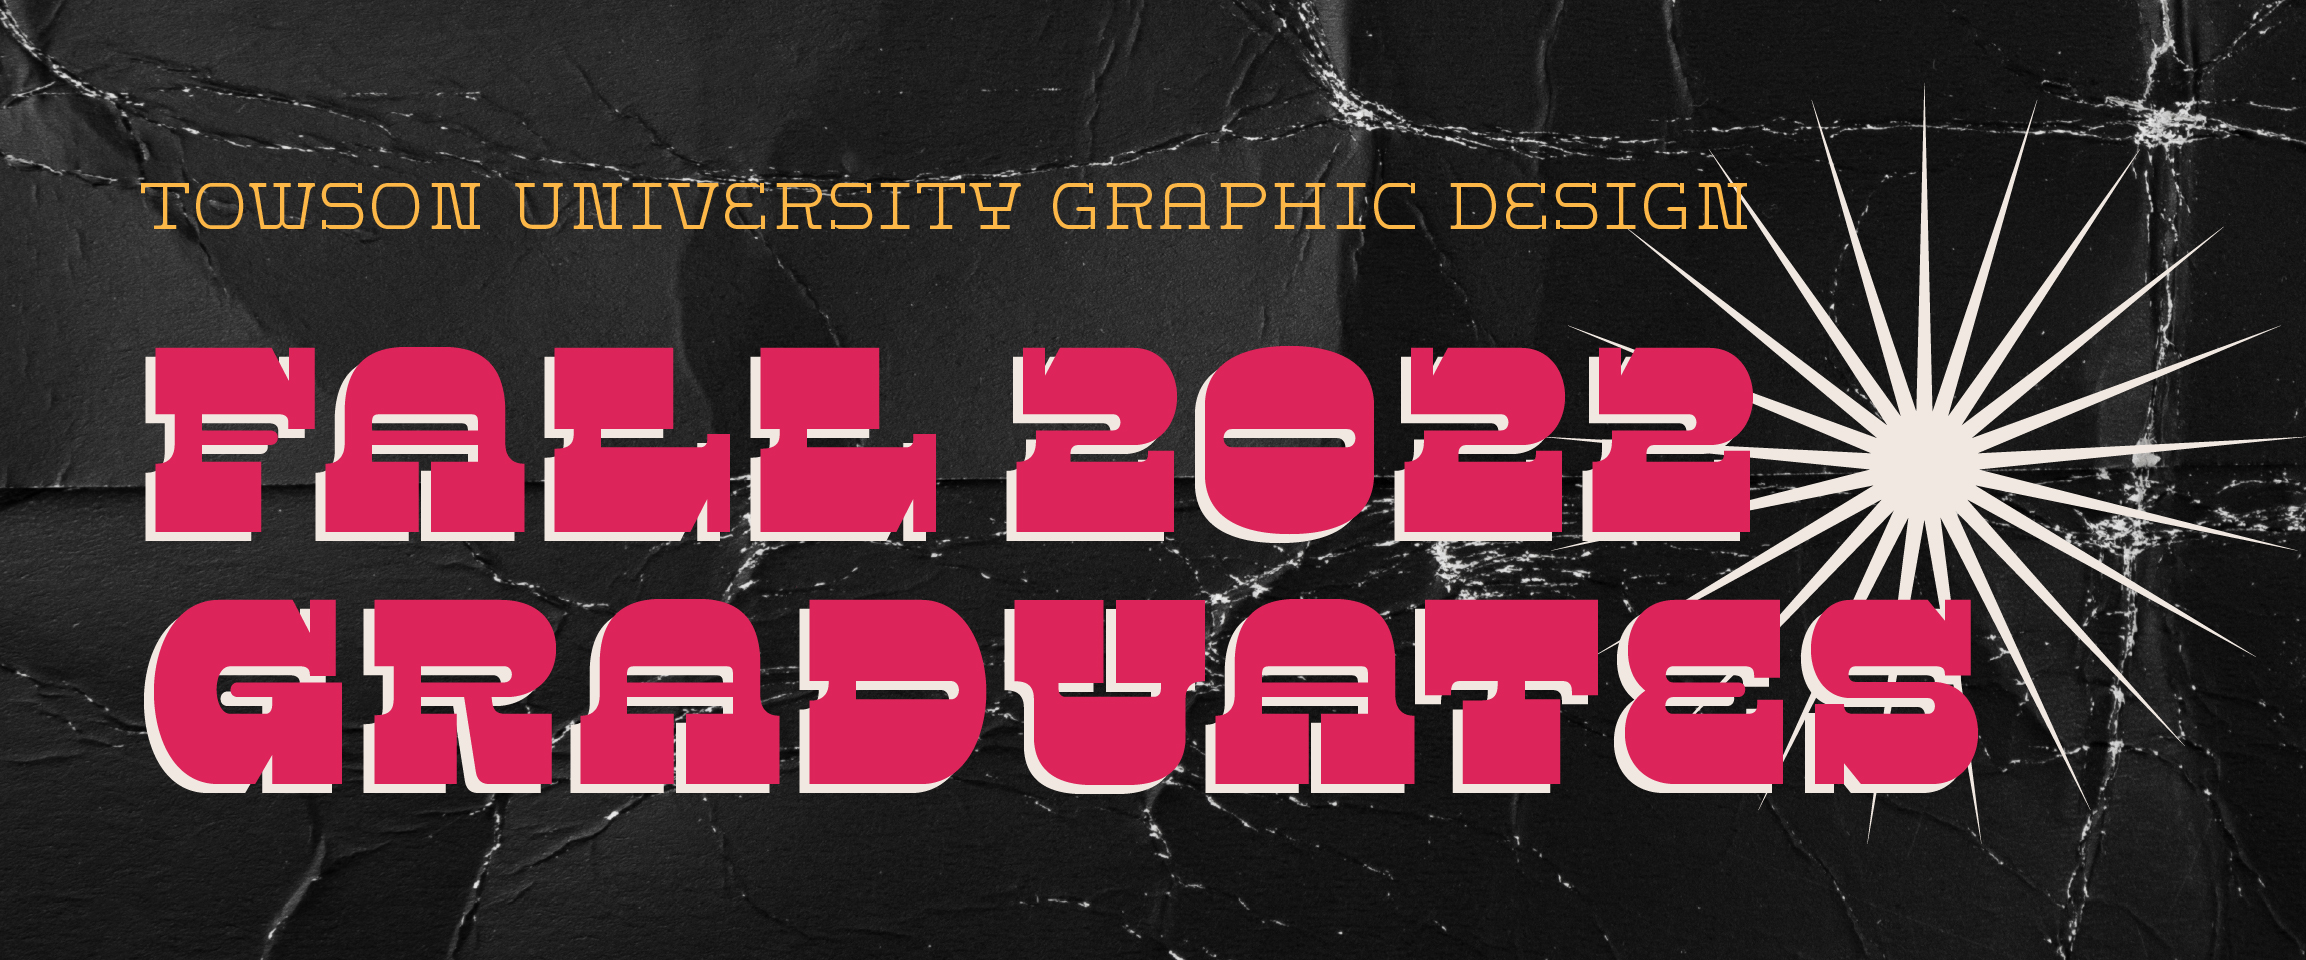 Opening image on a black background with a white starburst and yellow and magenta typography reading: Towson University Graphic Design Fall 2022 Graduates.